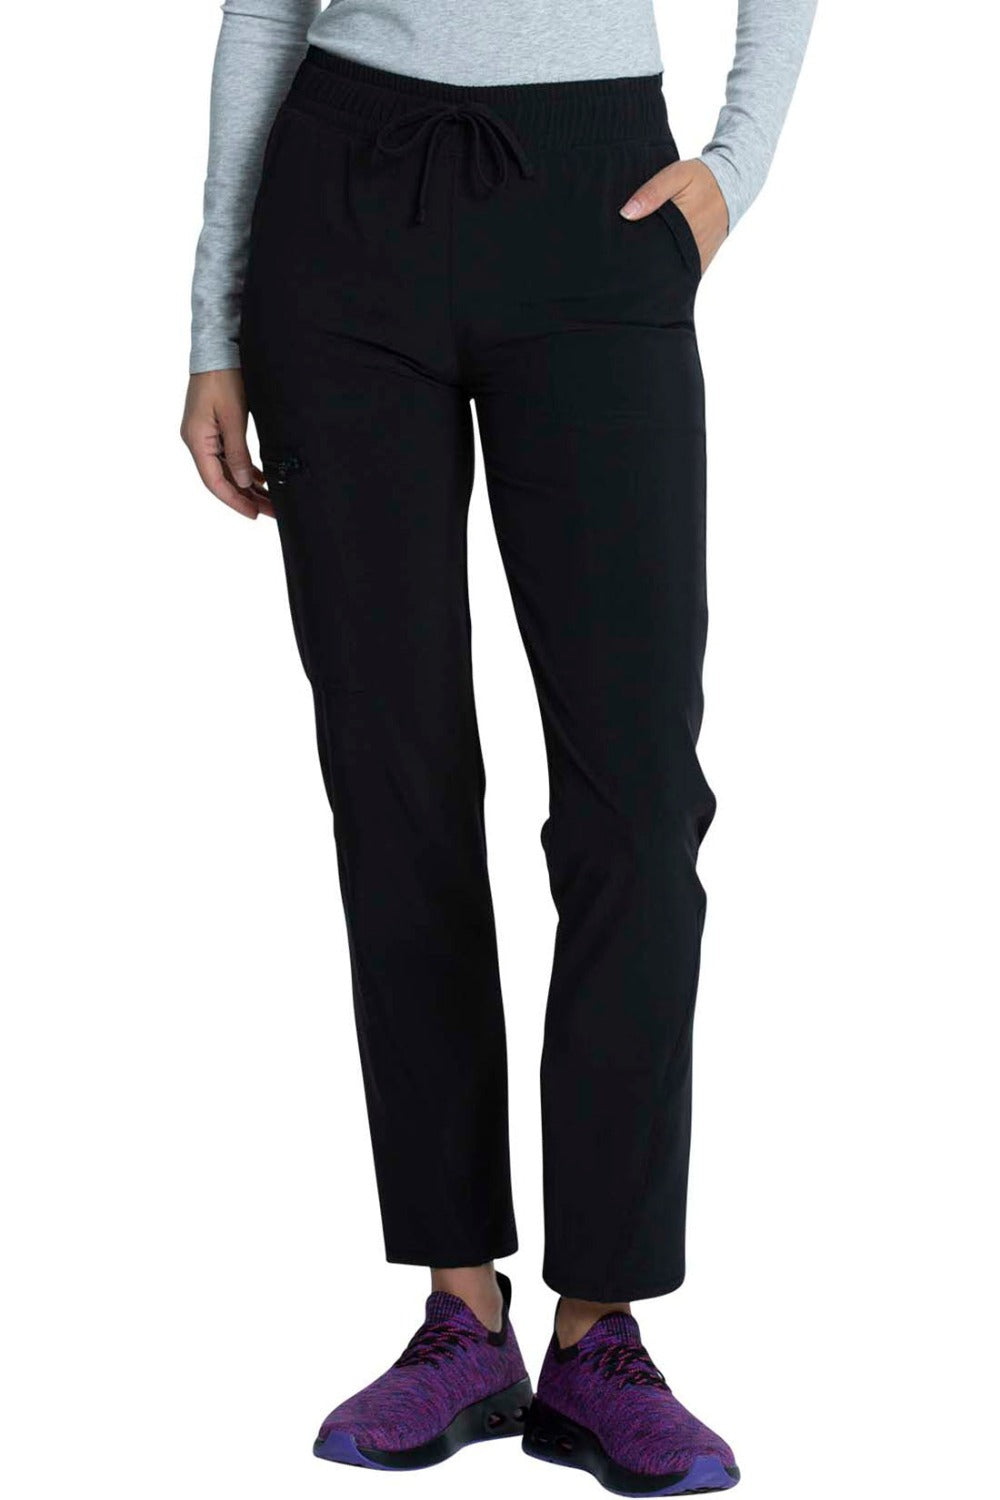 Cherokee Allura Scrub Pant Mid Rise Tapered Leg Drawstring in Black at Parker's Clothing and Shoes.